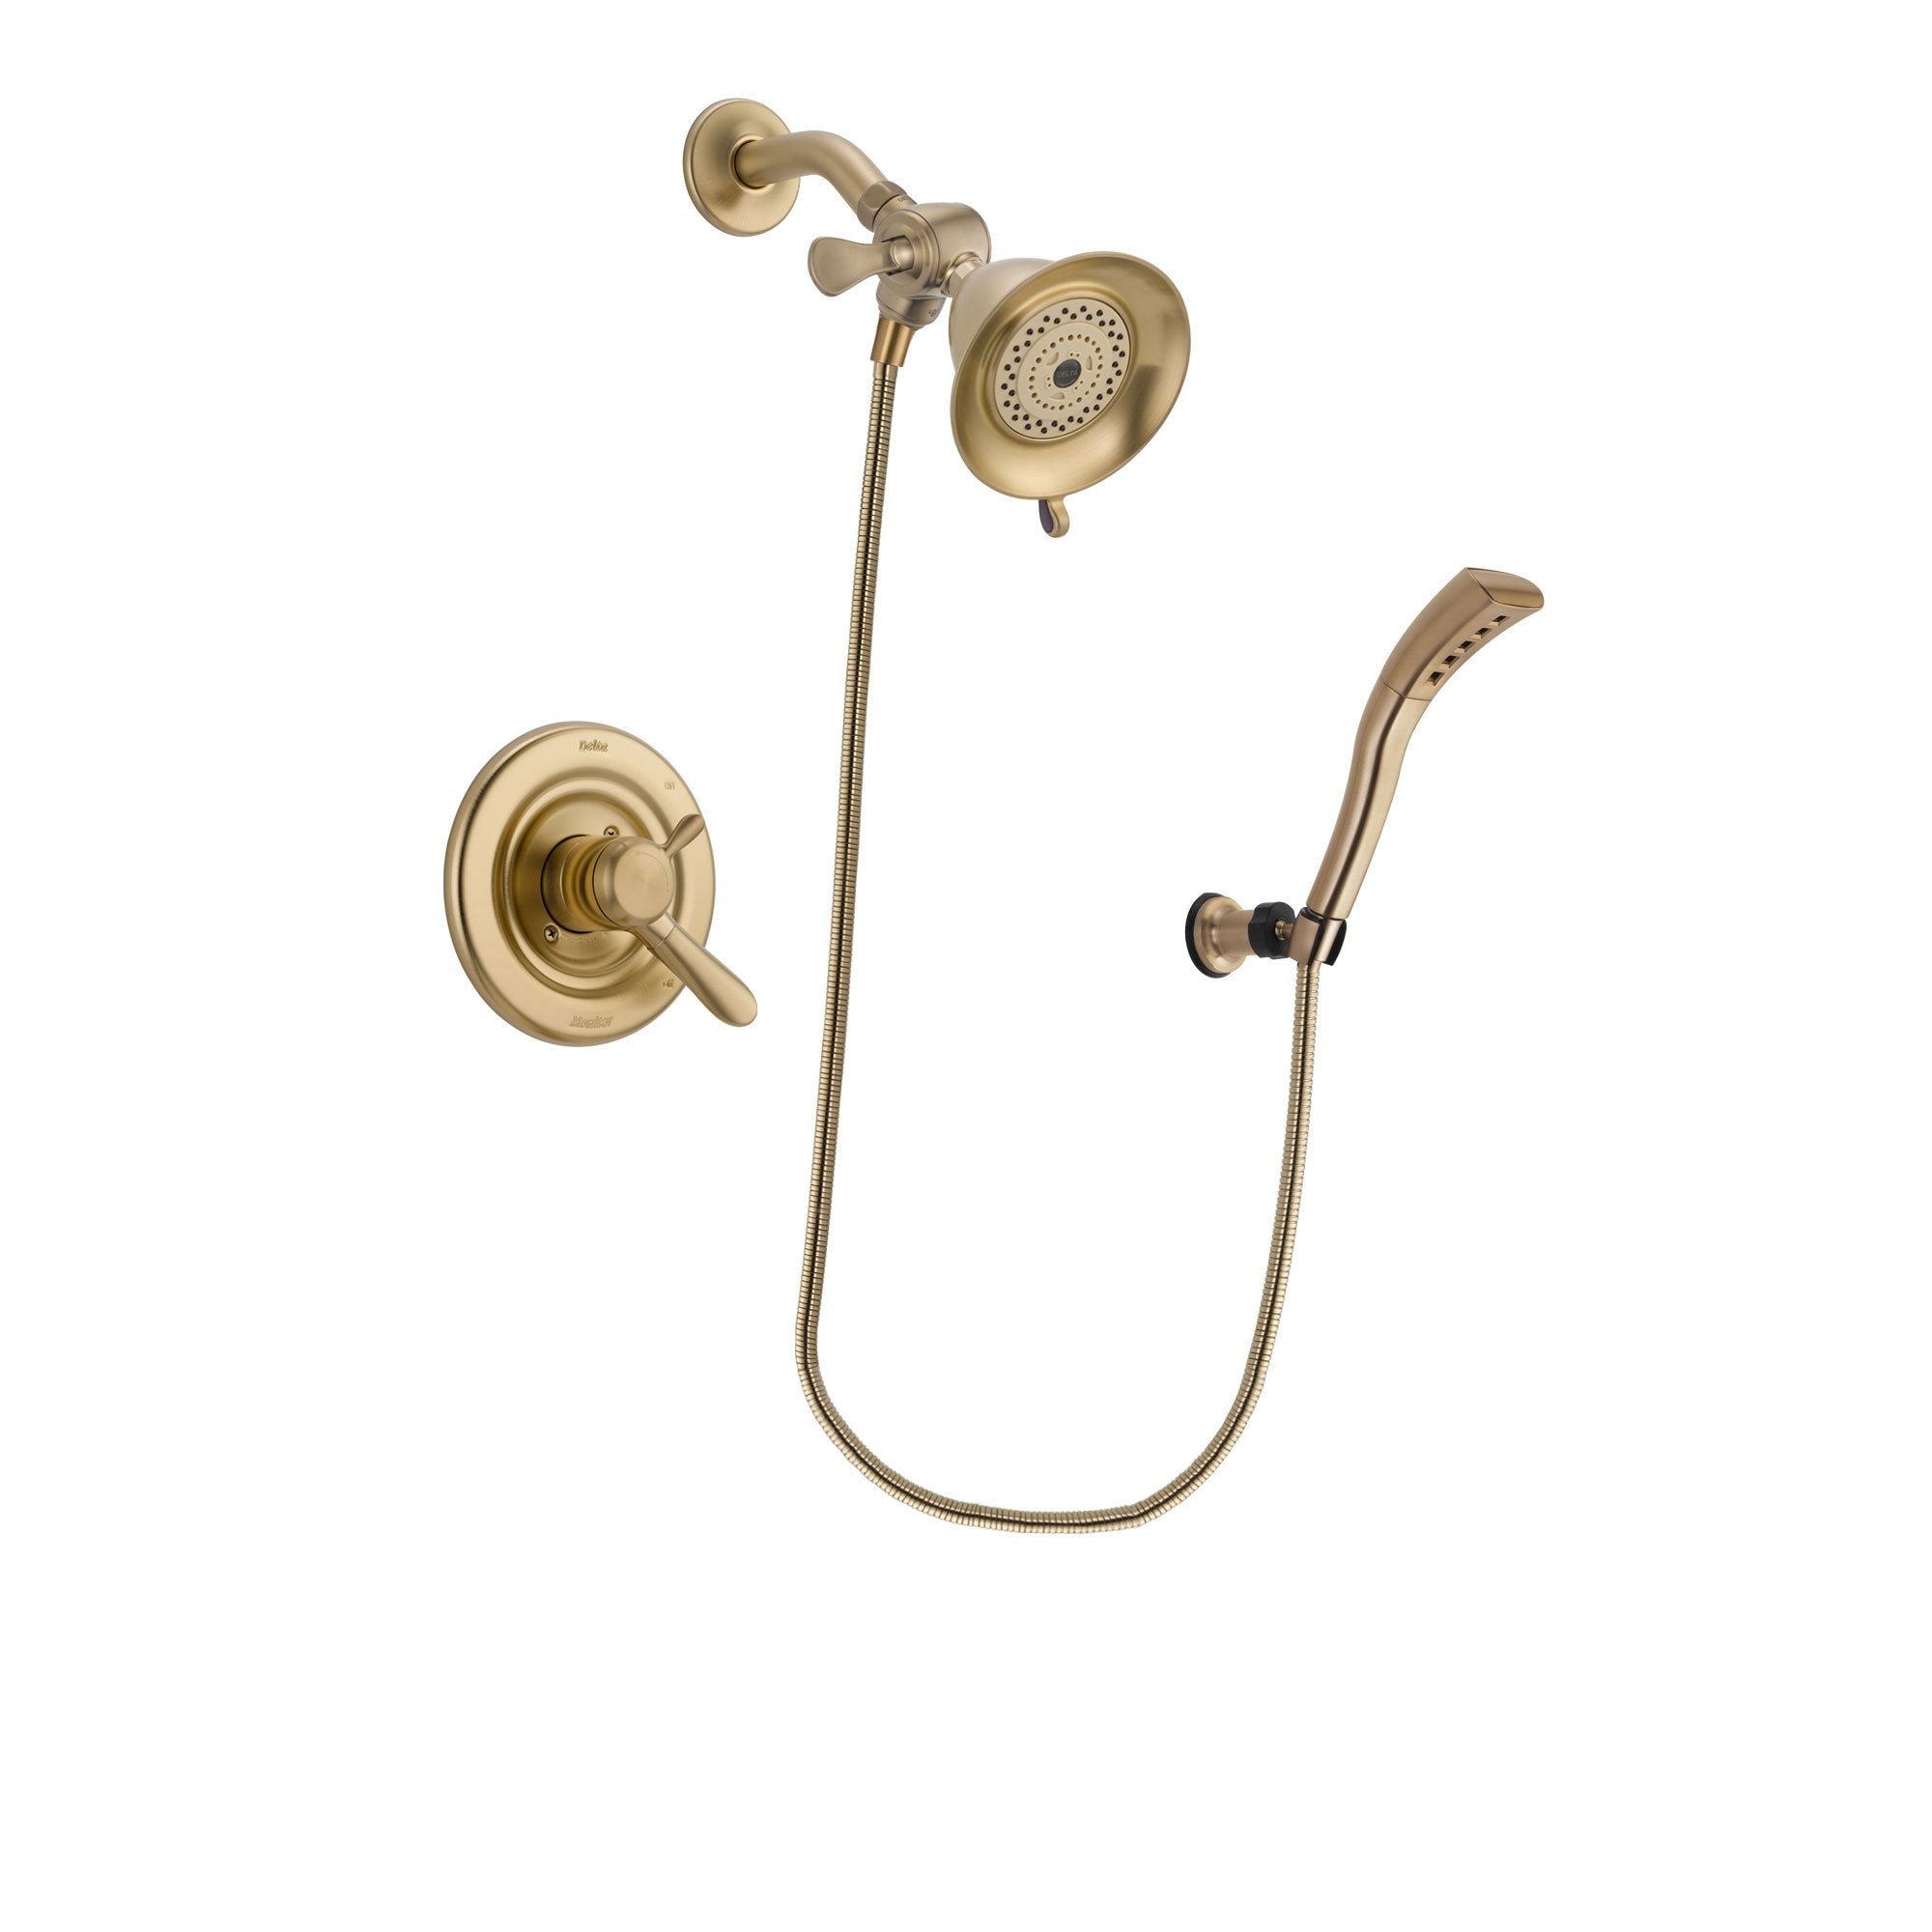 Delta Lahara Champagne Bronze Finish Dual Control Shower Faucet System Package with Water-Efficient Shower Head and Modern Wall Mount Personal Handheld Shower Spray Includes Rough-in Valve DSP3646V